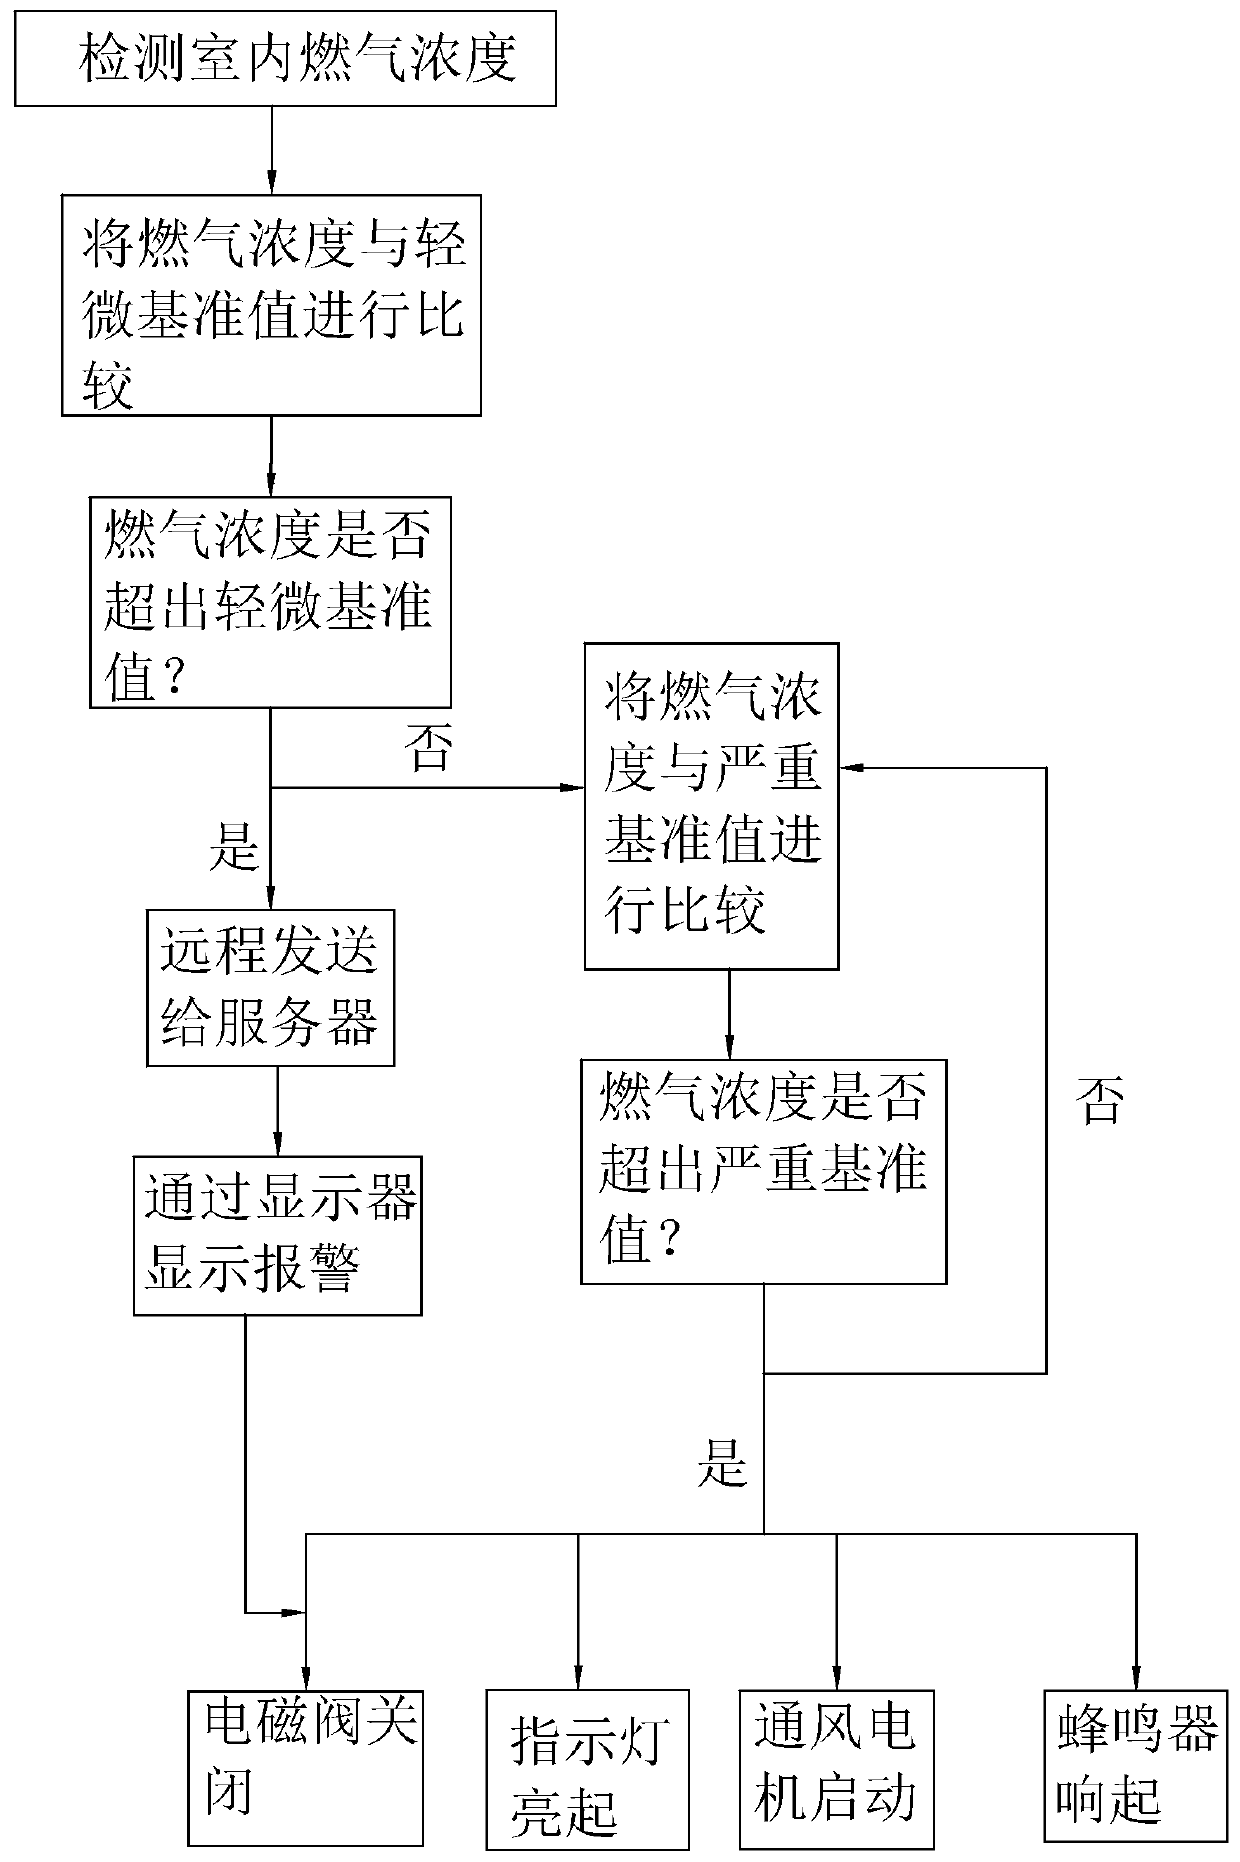 Intelligent automatic gas cut-off valve control system and control method thereof